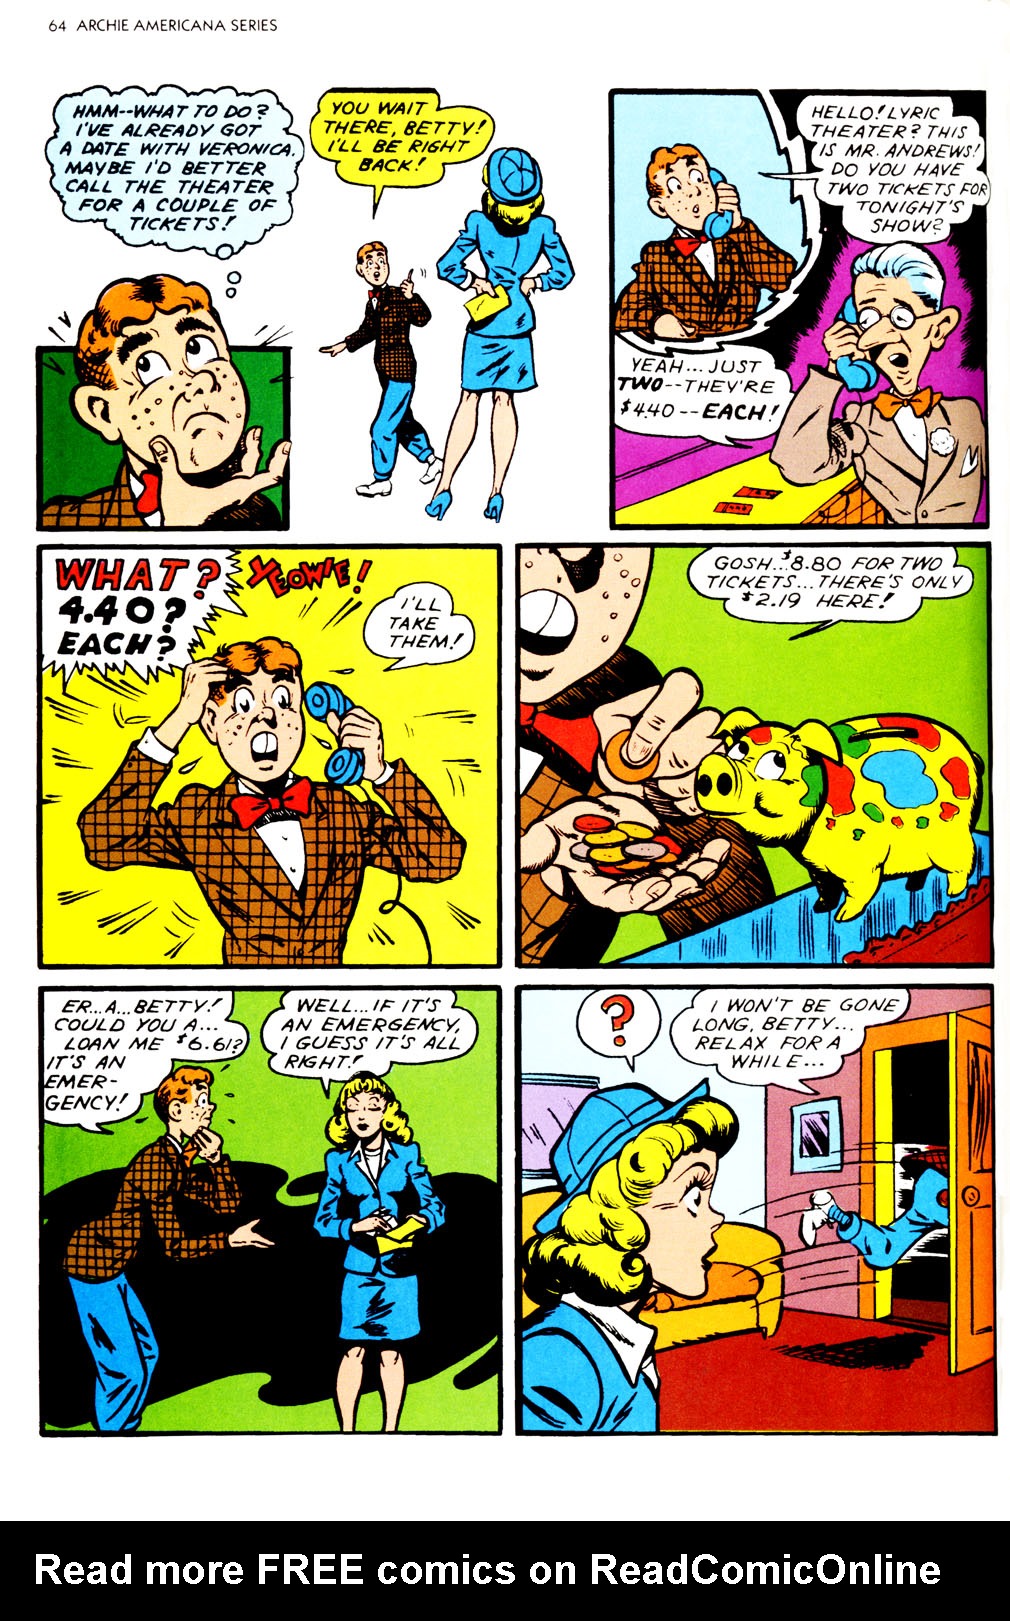 Read online Archie Americana Series comic -  Issue # TPB 1 - 65